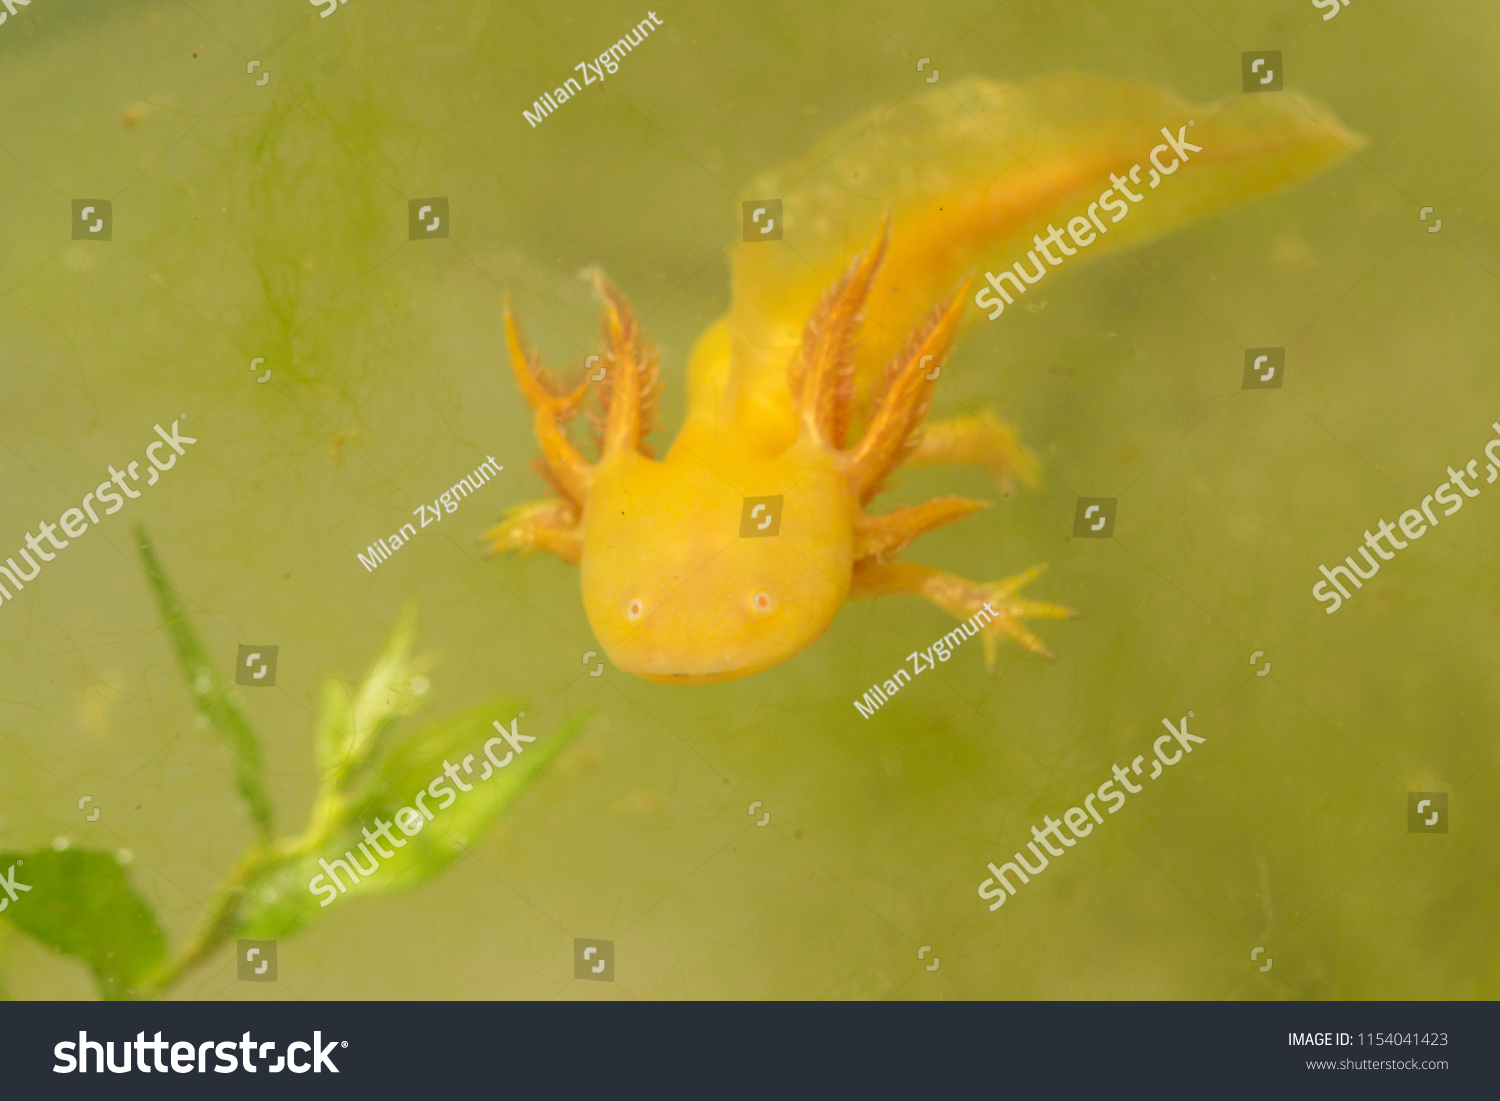 Ambystoma Mexicanum Known Mexican Walking Fish Stock Photo 1154041423